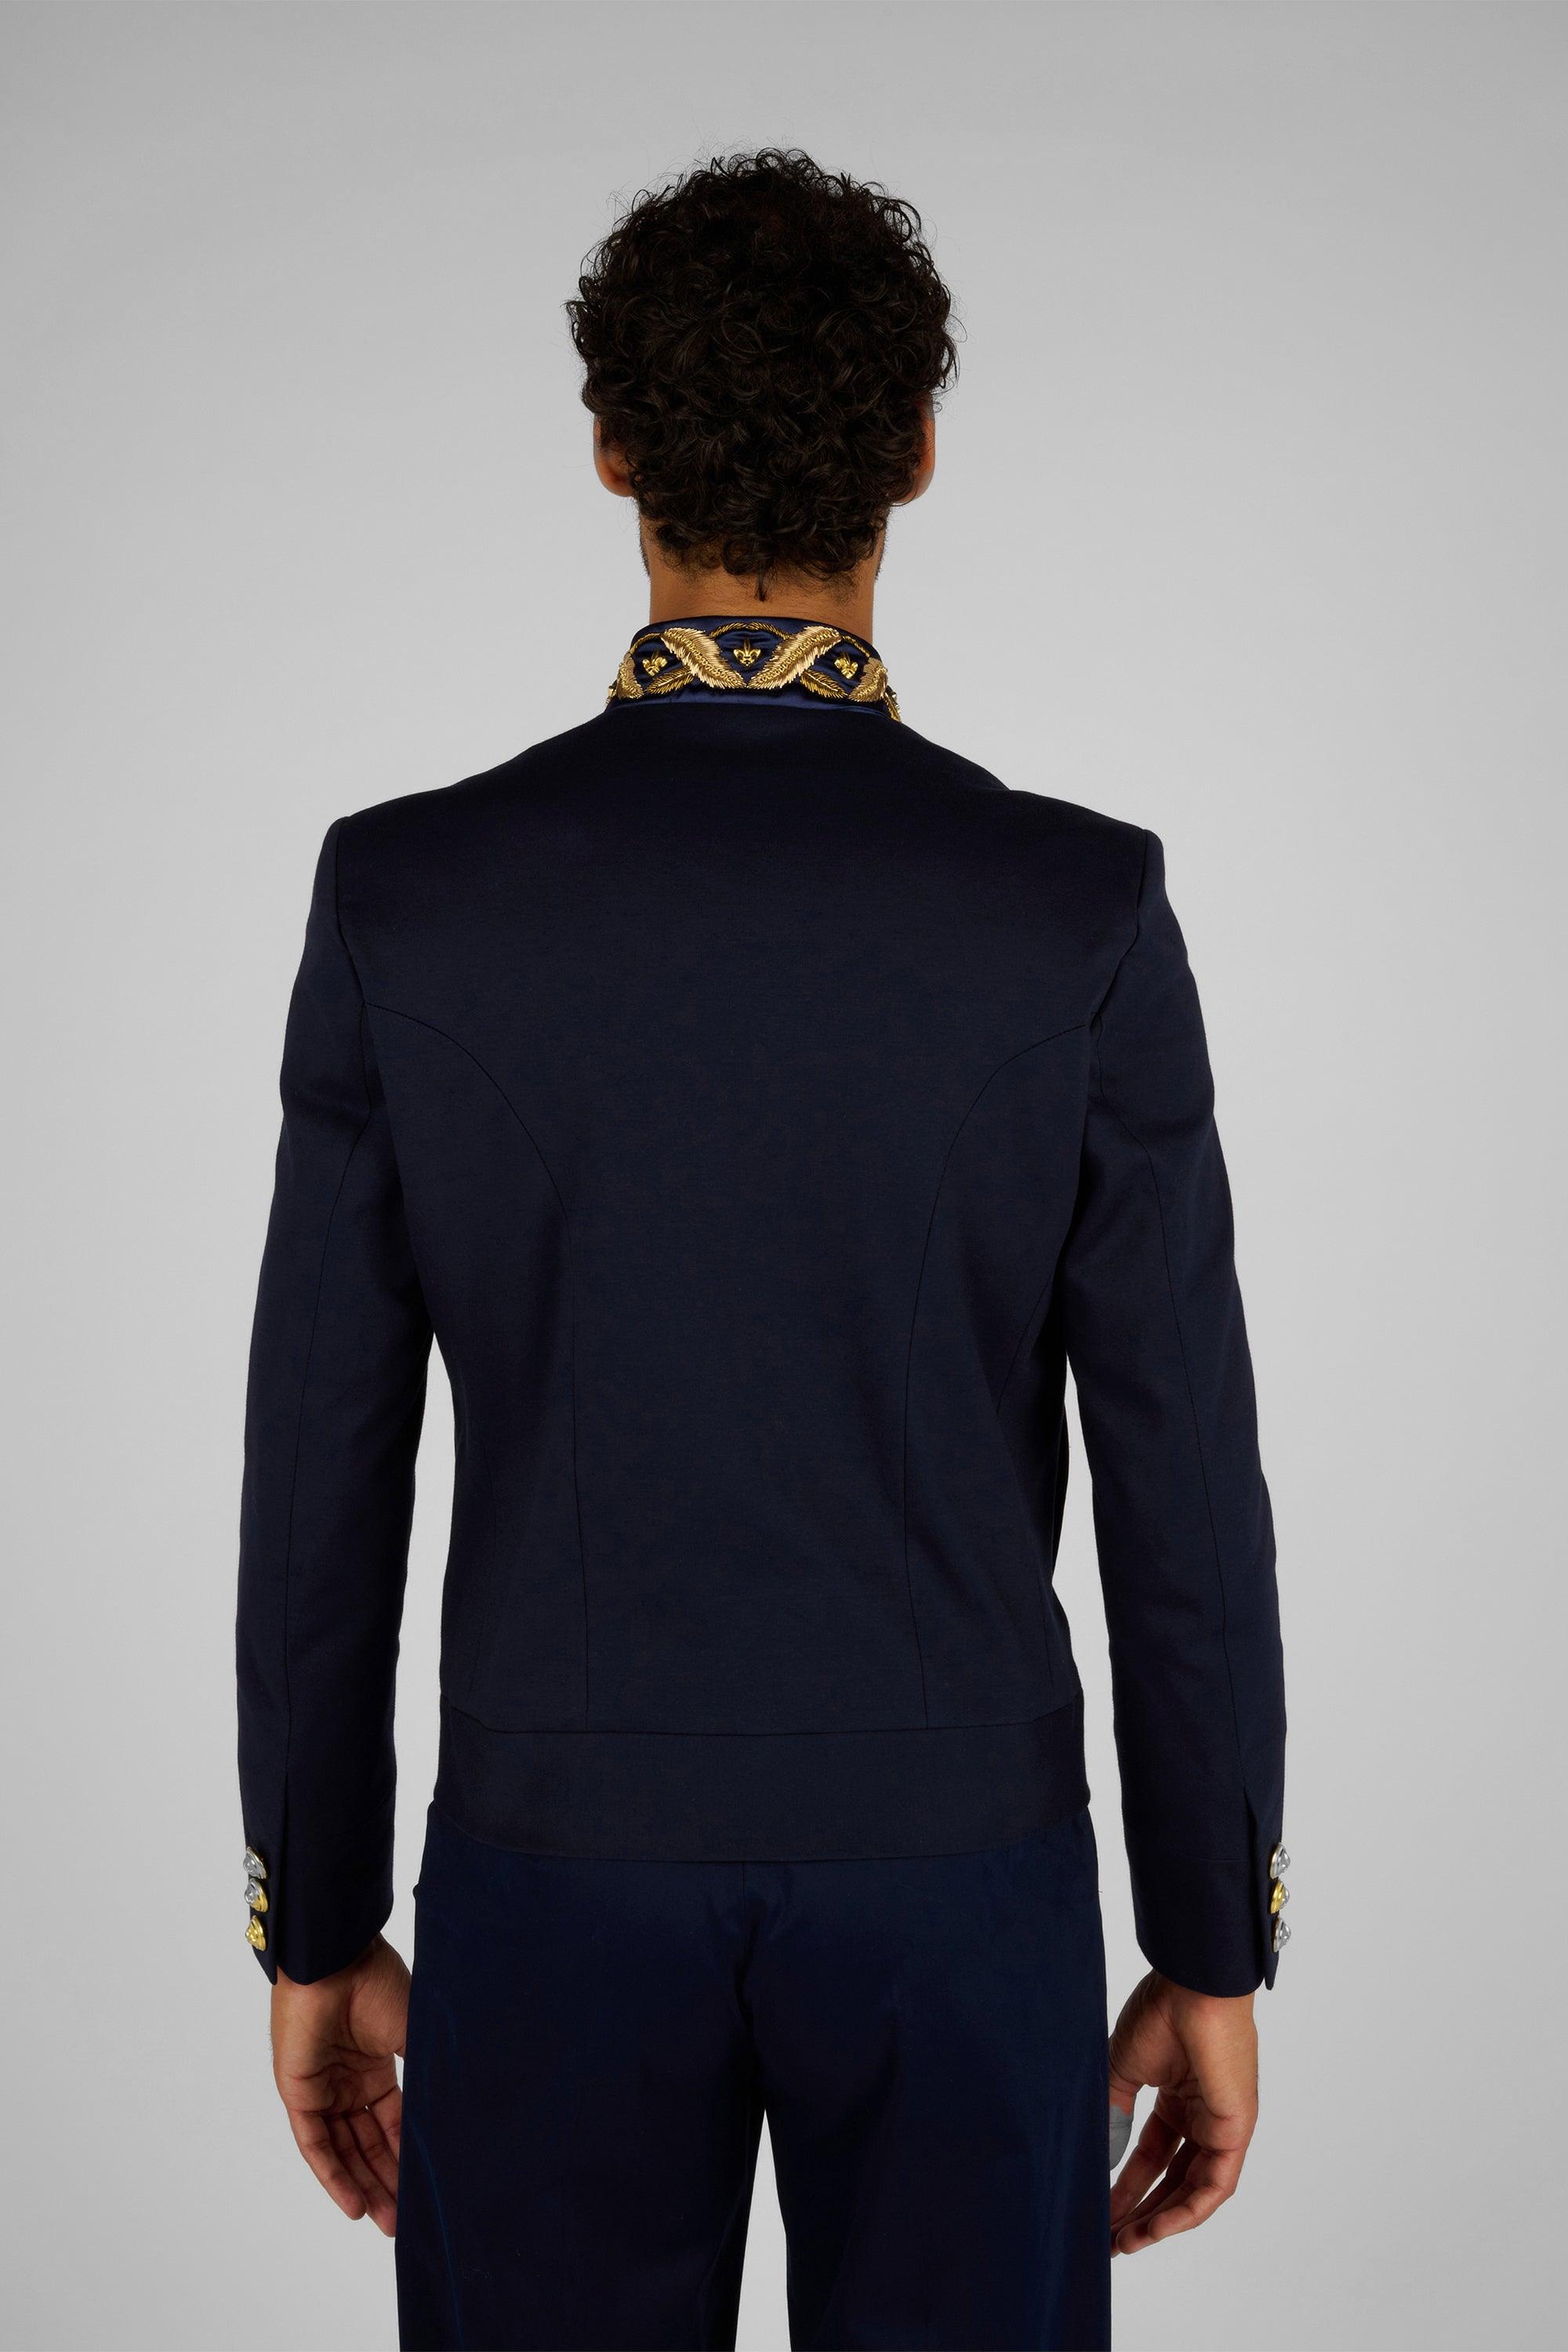 MANTEAU MILITAIRE BRODE COURT - Lords & Fools broderies, dandy, frenchstyle, menfashion, militaire, Mood_Military, paris, parisianstyle, S24, suit, SUMMER 2024, tailoring